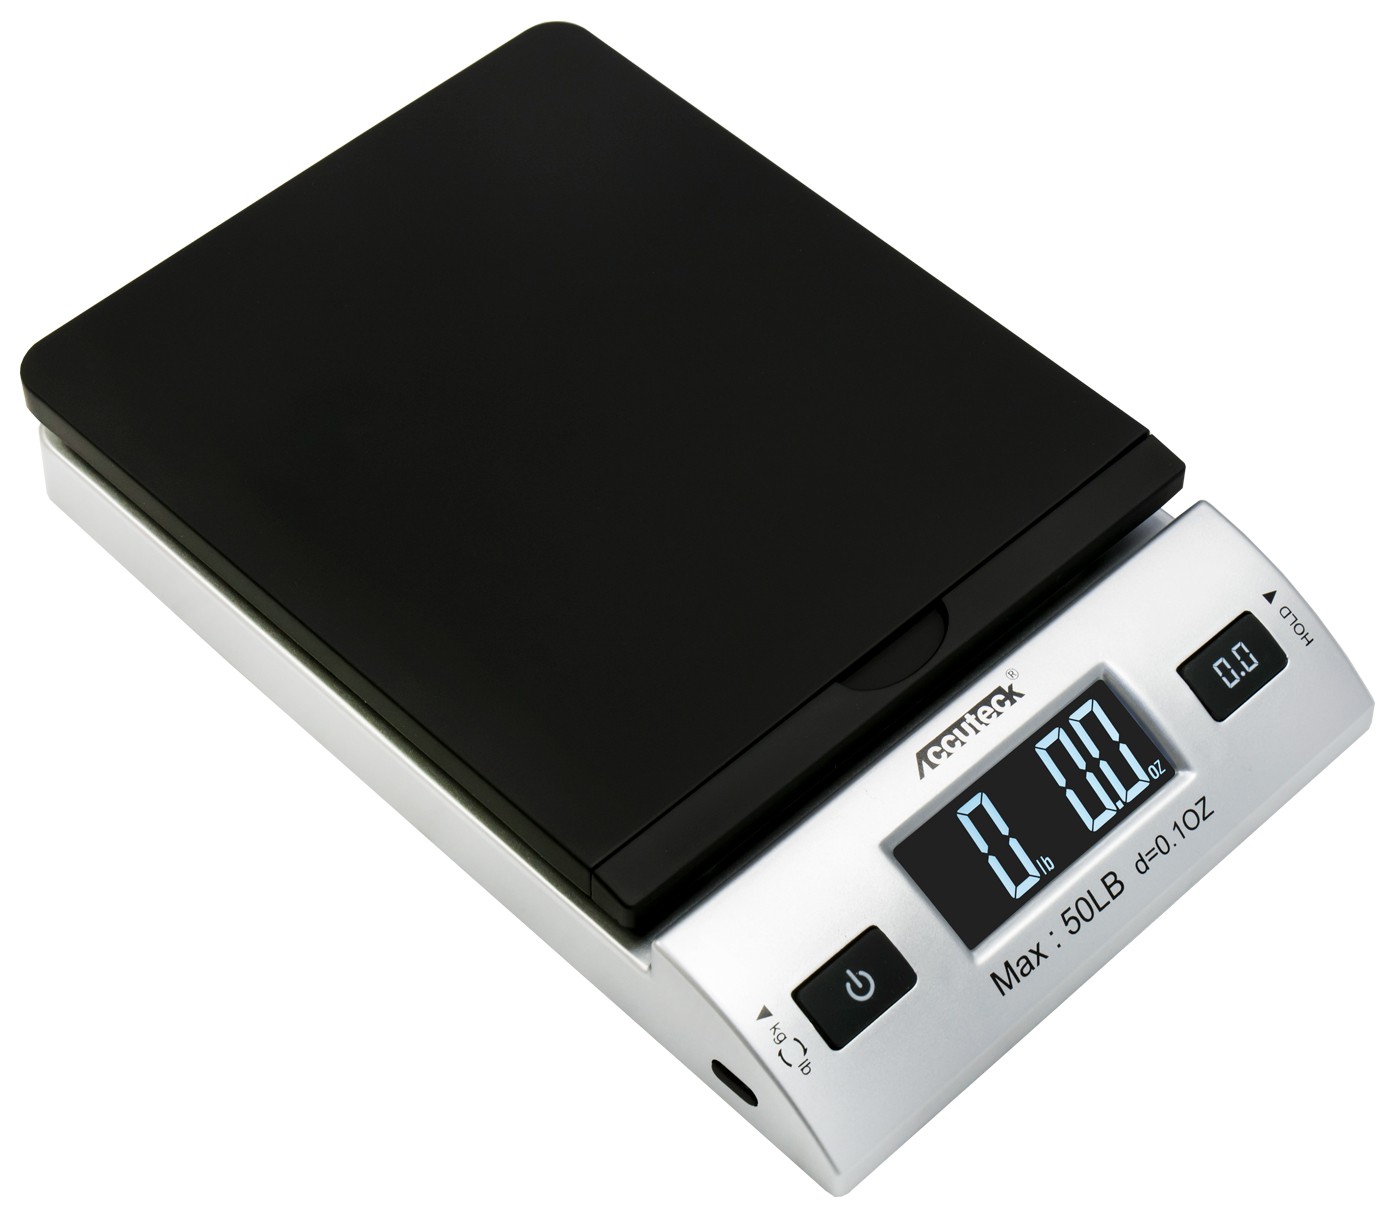 Accuteck S All-In-One Digital Shipping Postal Scale W/AC Postage